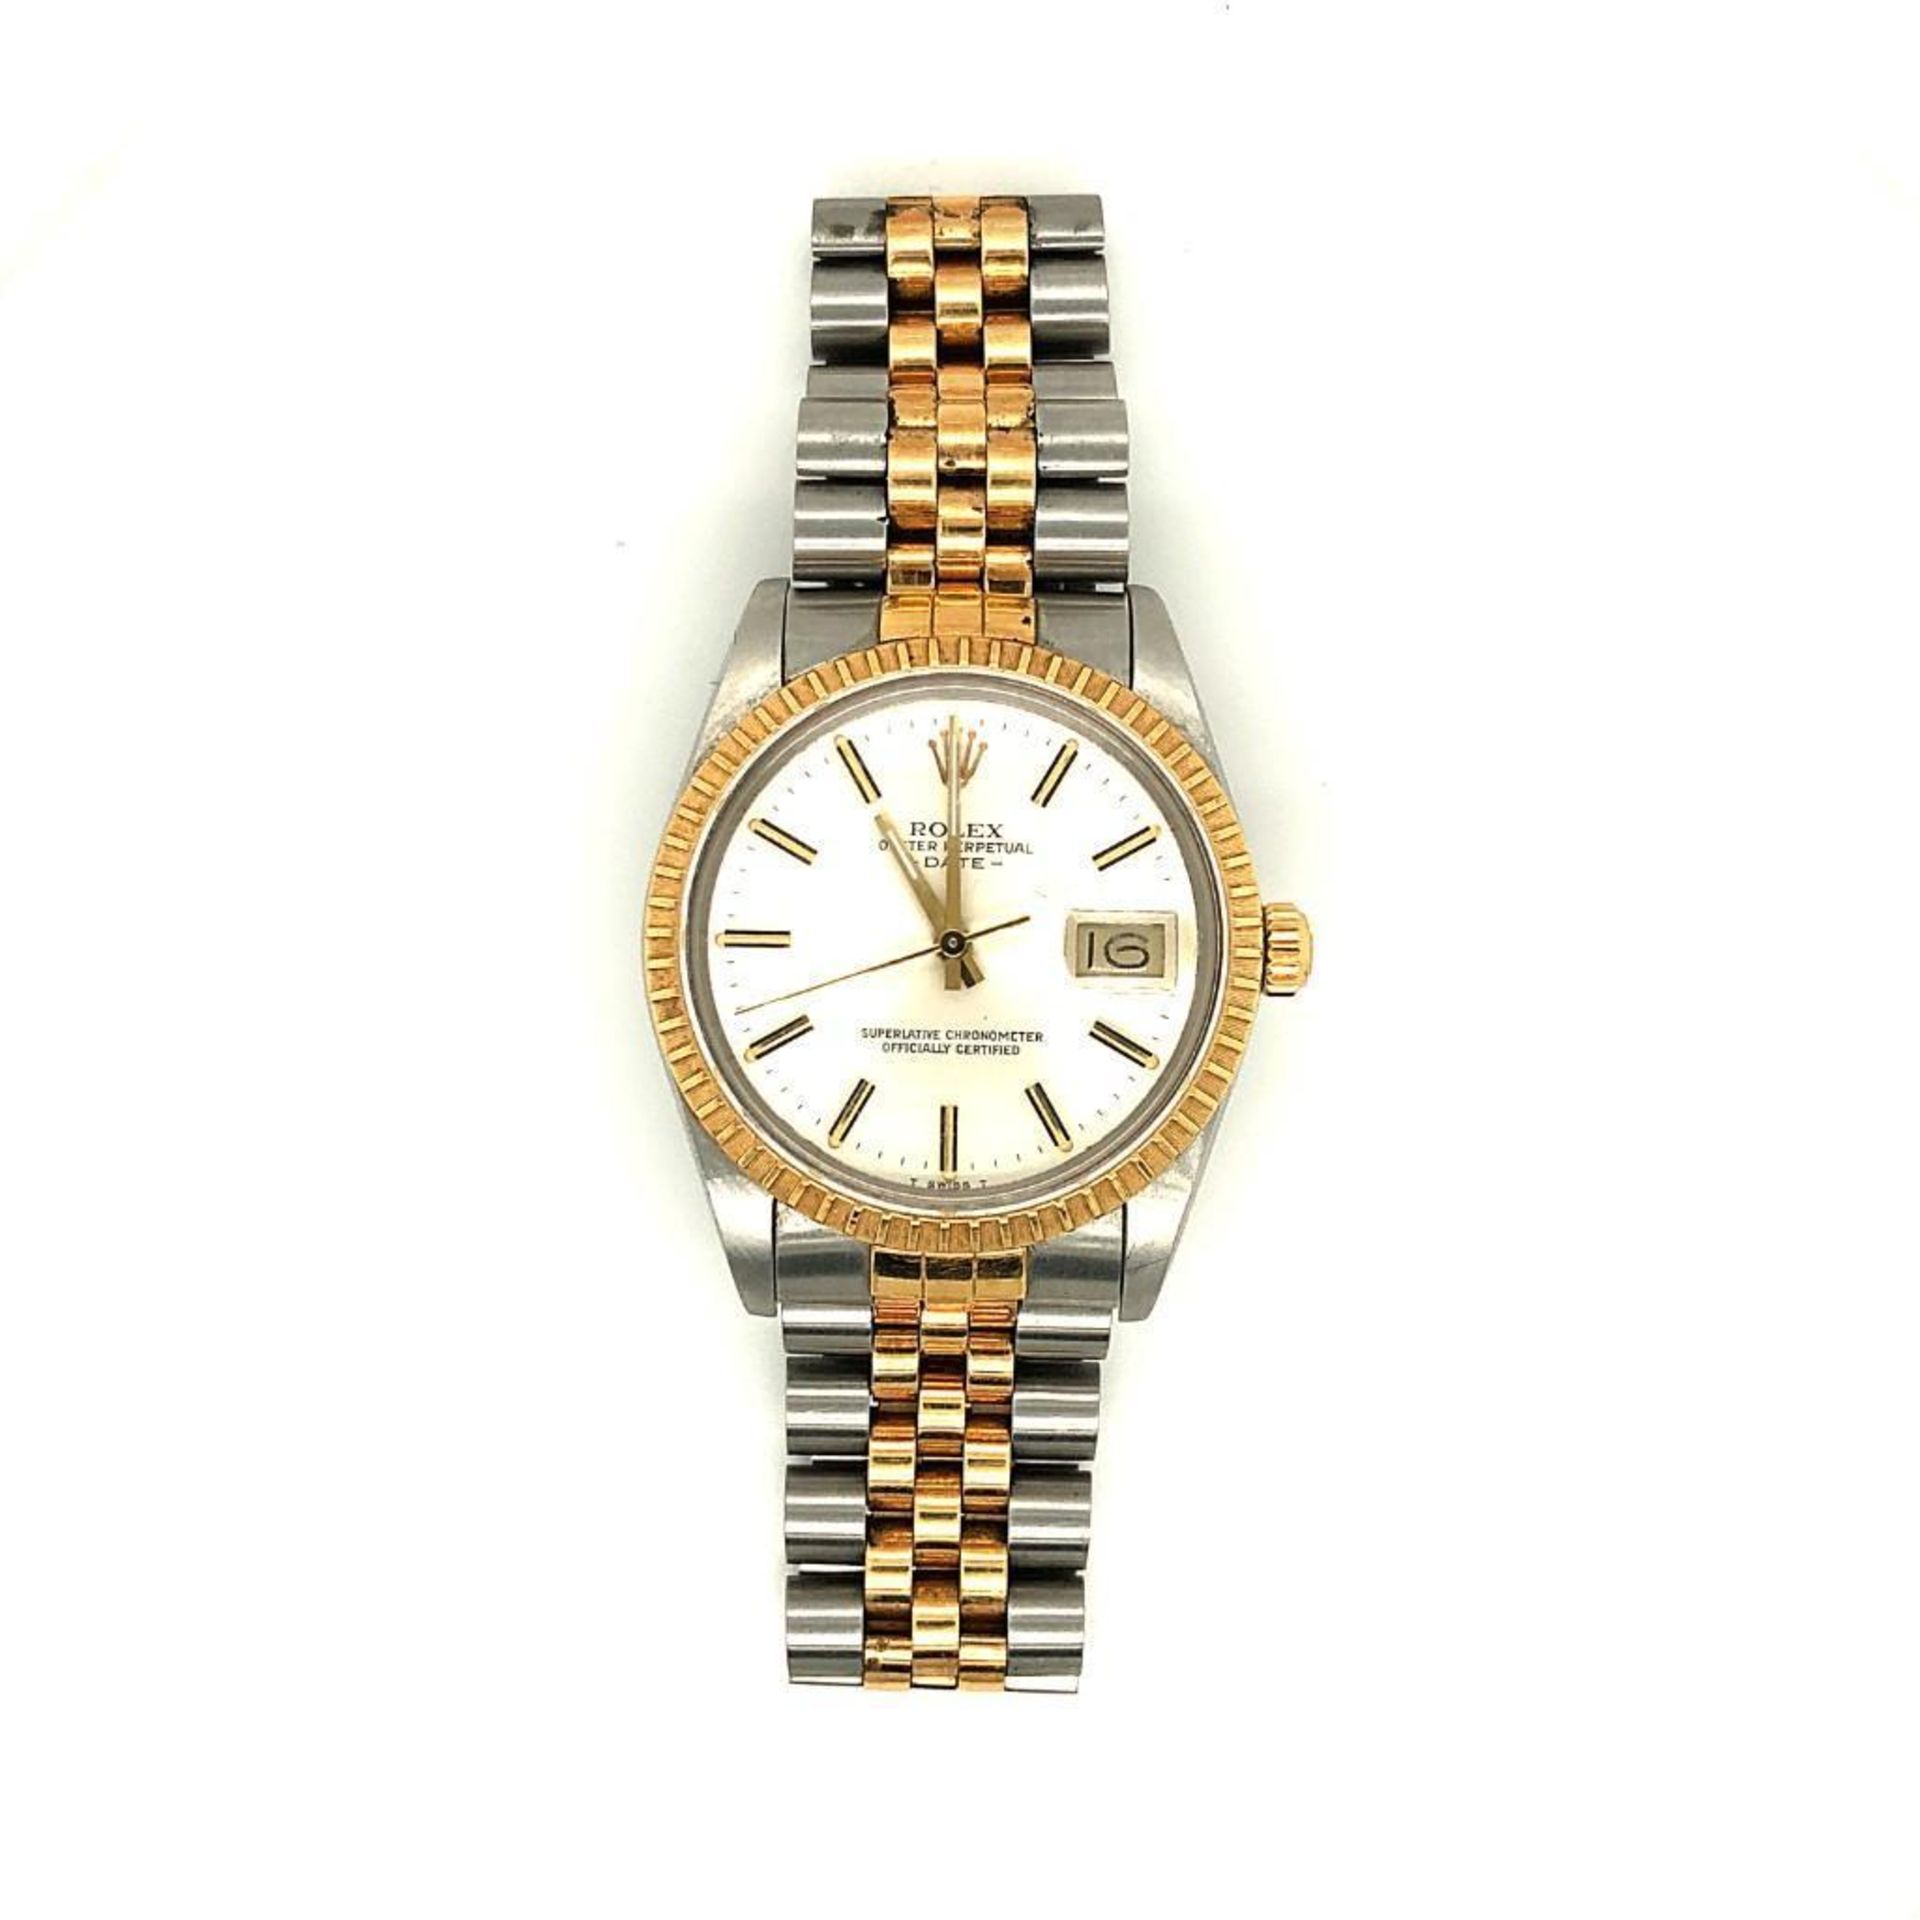 MENS 18K YELLOW GOLD AND STAINLESS STEEL ROLEX DATEJUST. SILVER DIAL. MODEL 15053; SERIAL R2*****.